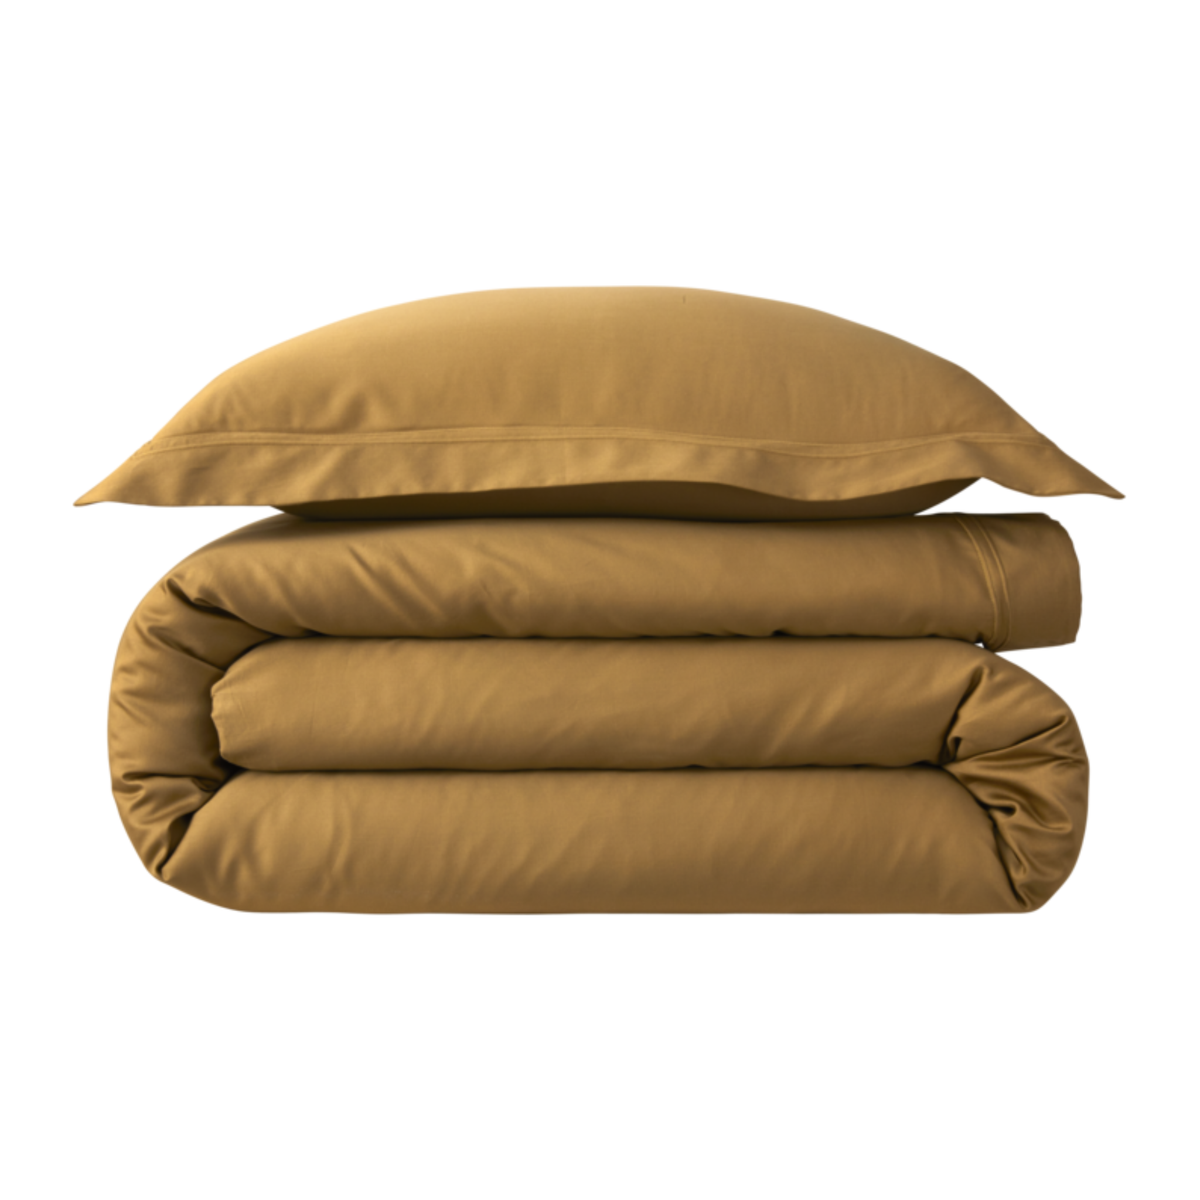 Stack of Pillow and Sheets of Yves Delorme Triomphe Bedding in Bronze Color